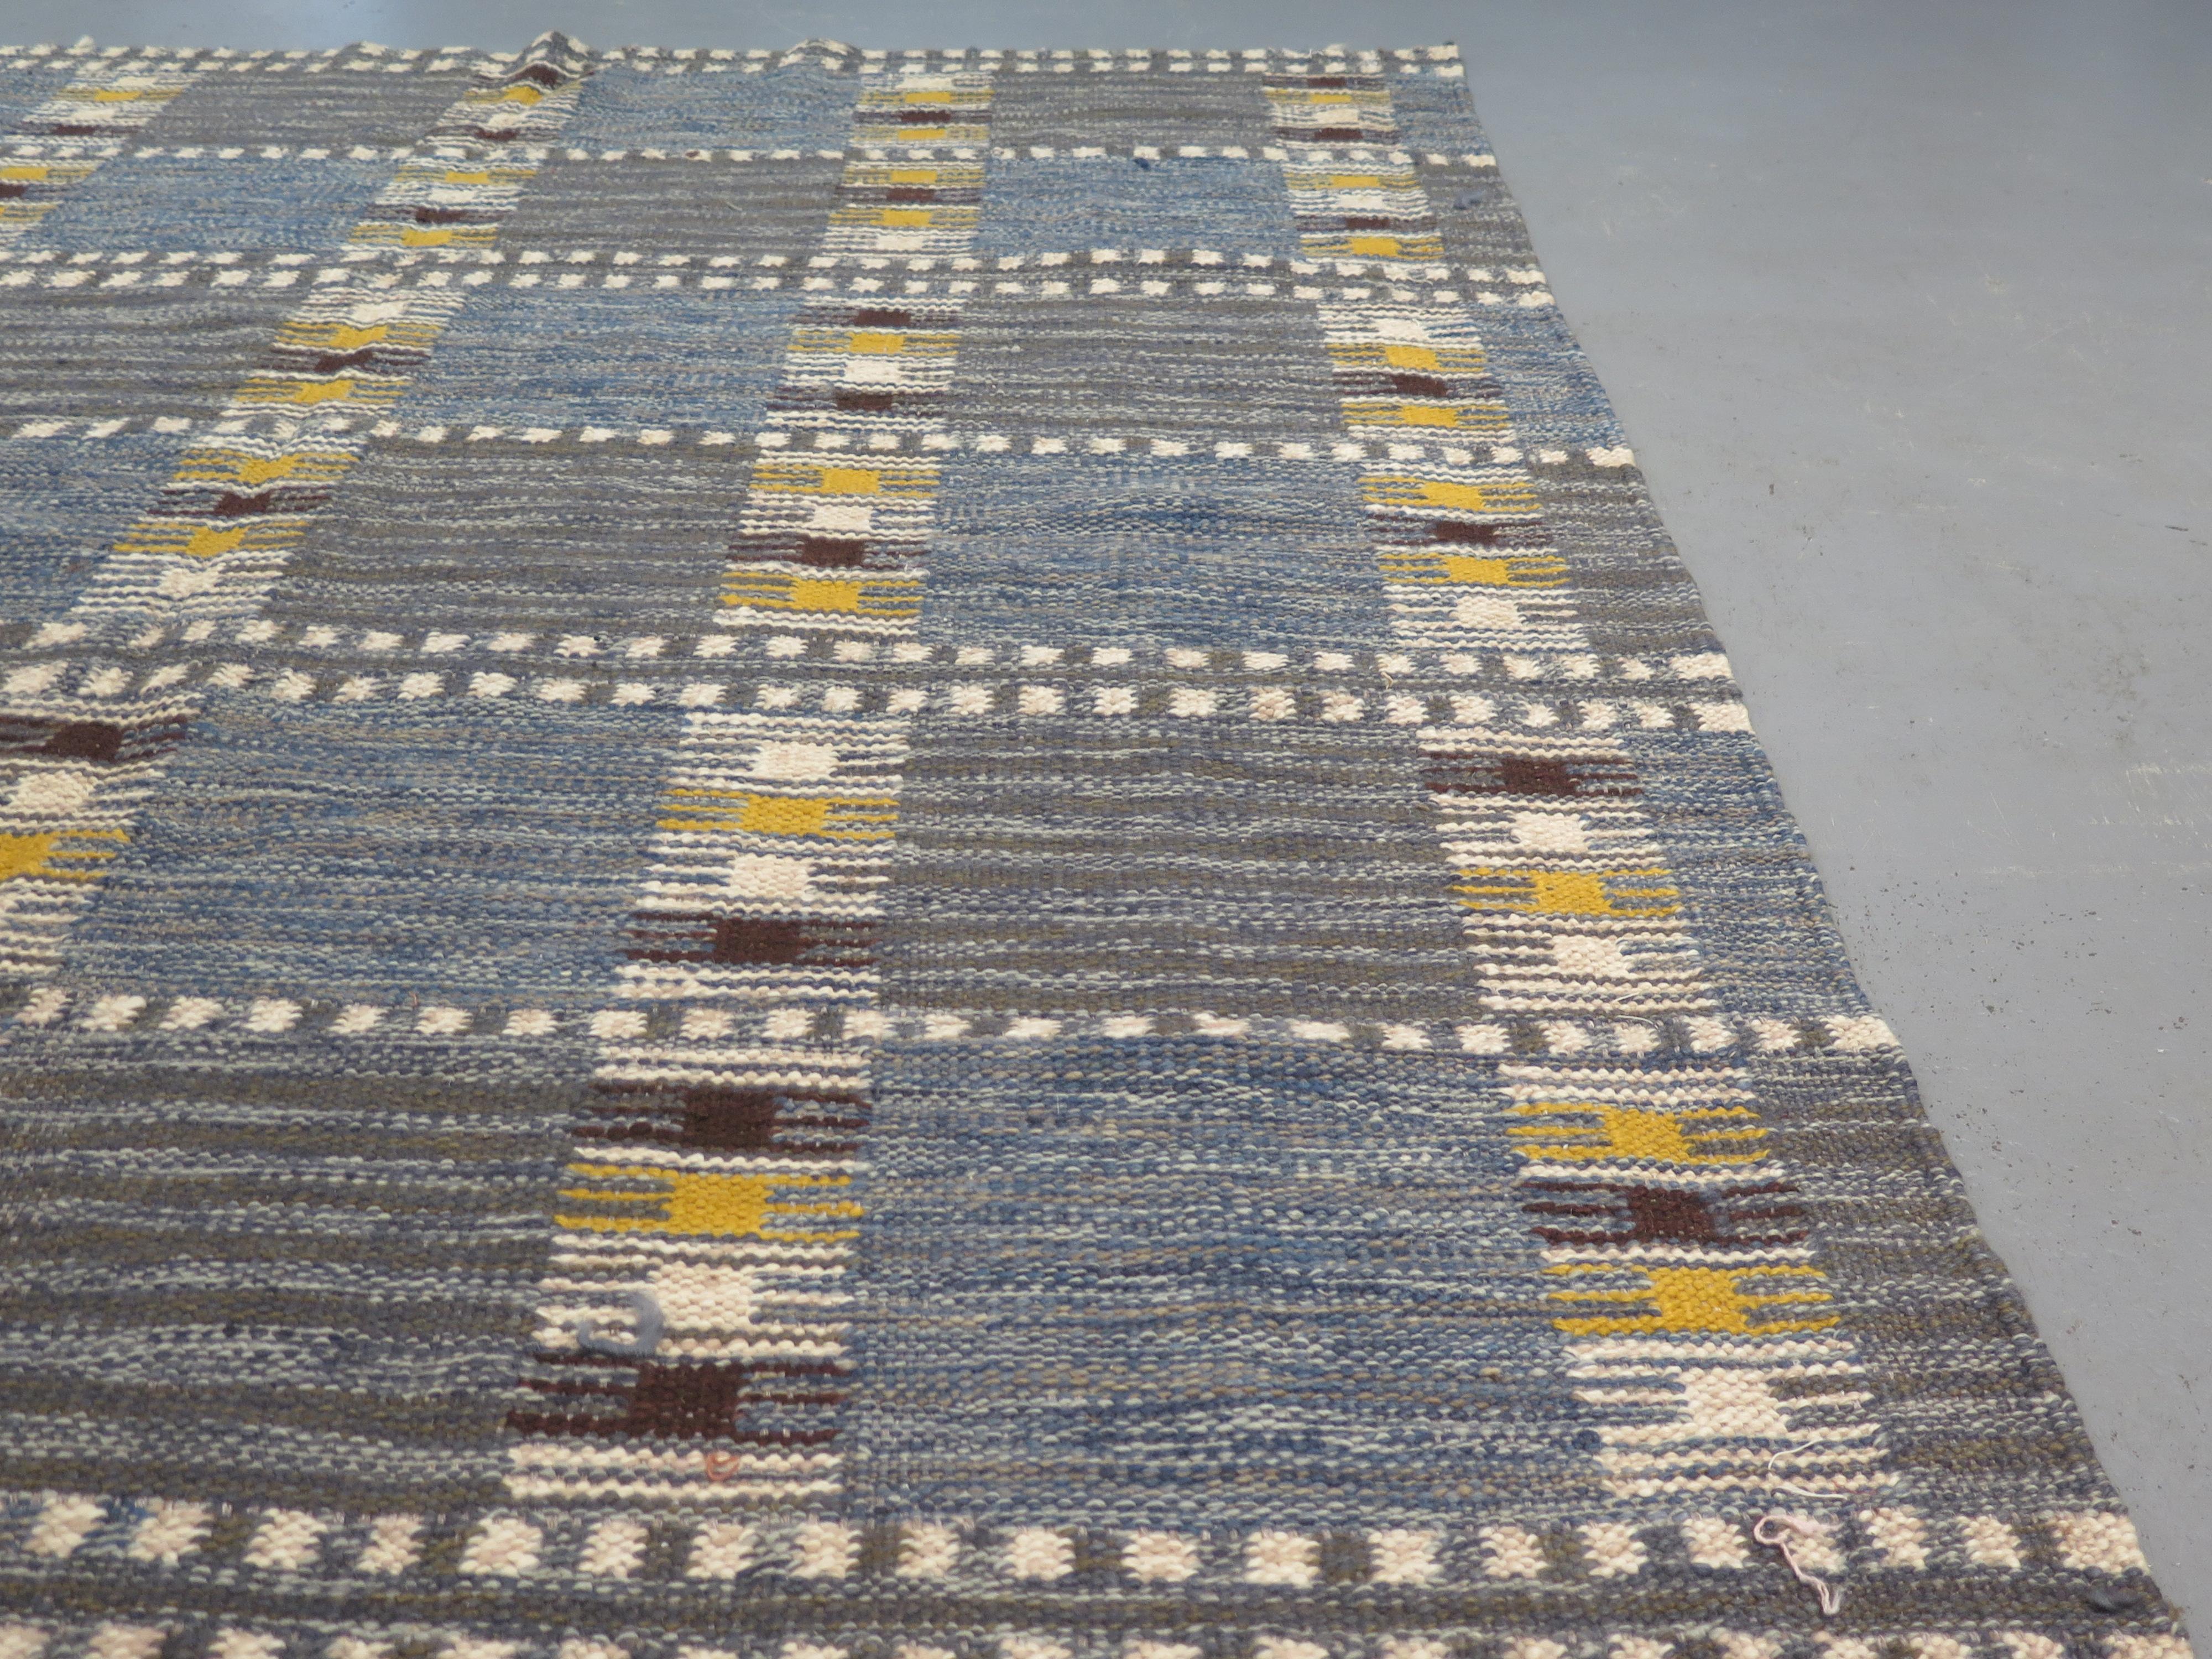 Flatweave carpets – known as röllakan – have been woven in Sweden since the 17th Century or earlier, but experienced a particular revival in the mid-20th Century, incorporating elements of both mid-century modern and folk design. These pieces are